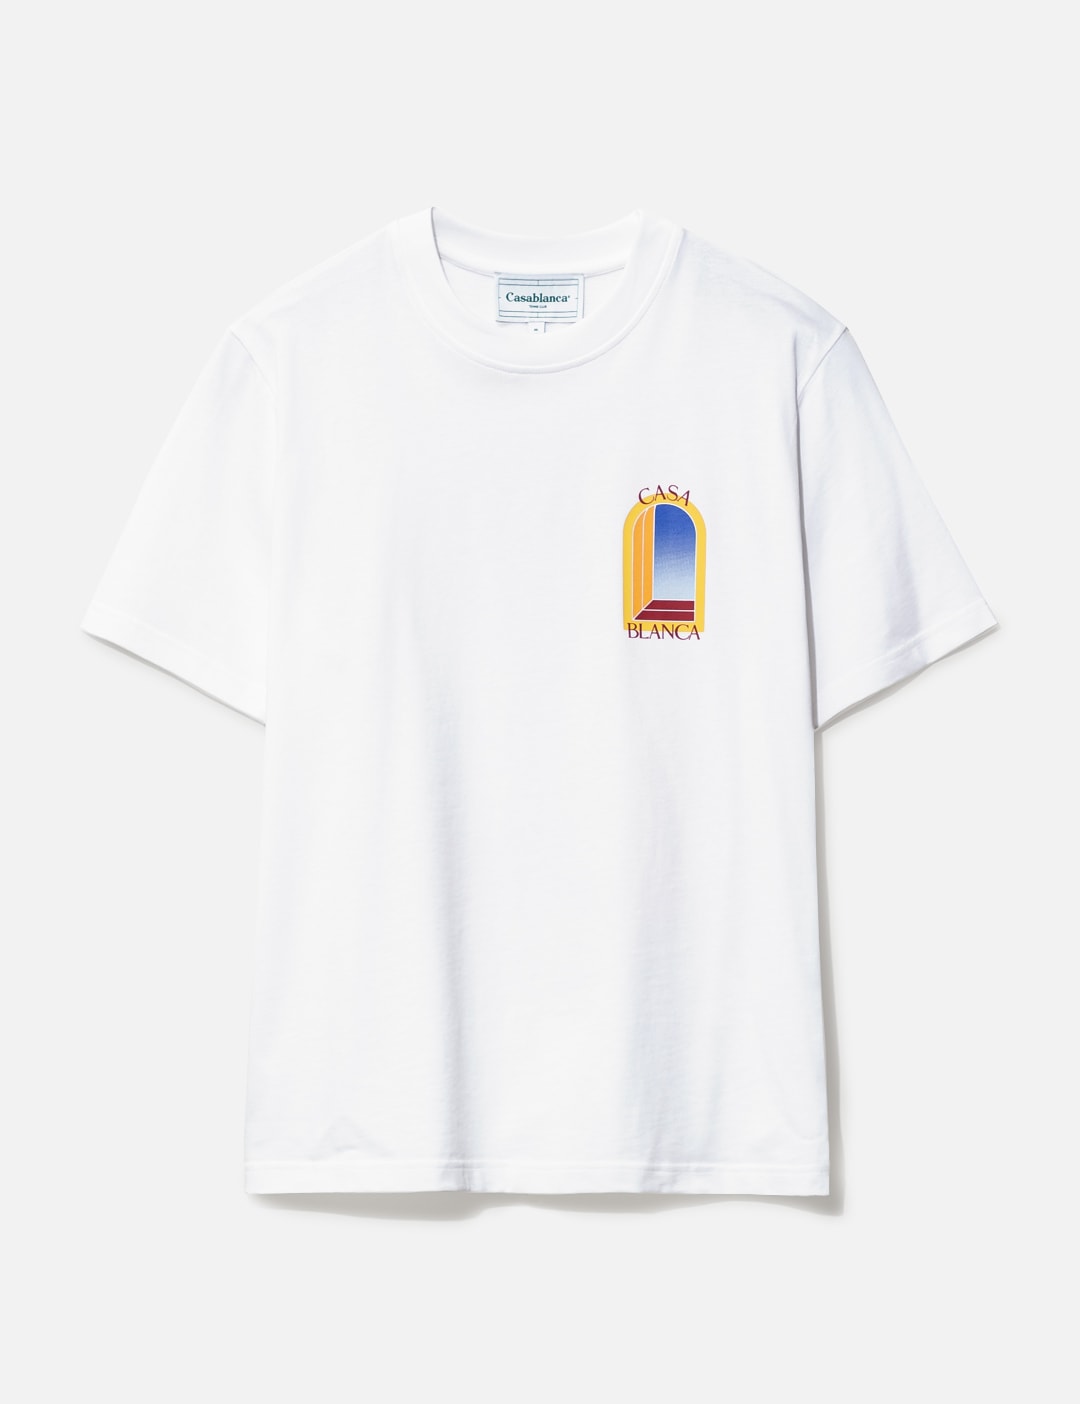 Casablanca - L'Arche De Jour T-Shirt | HBX - Globally Curated Fashion and  Lifestyle by Hypebeast